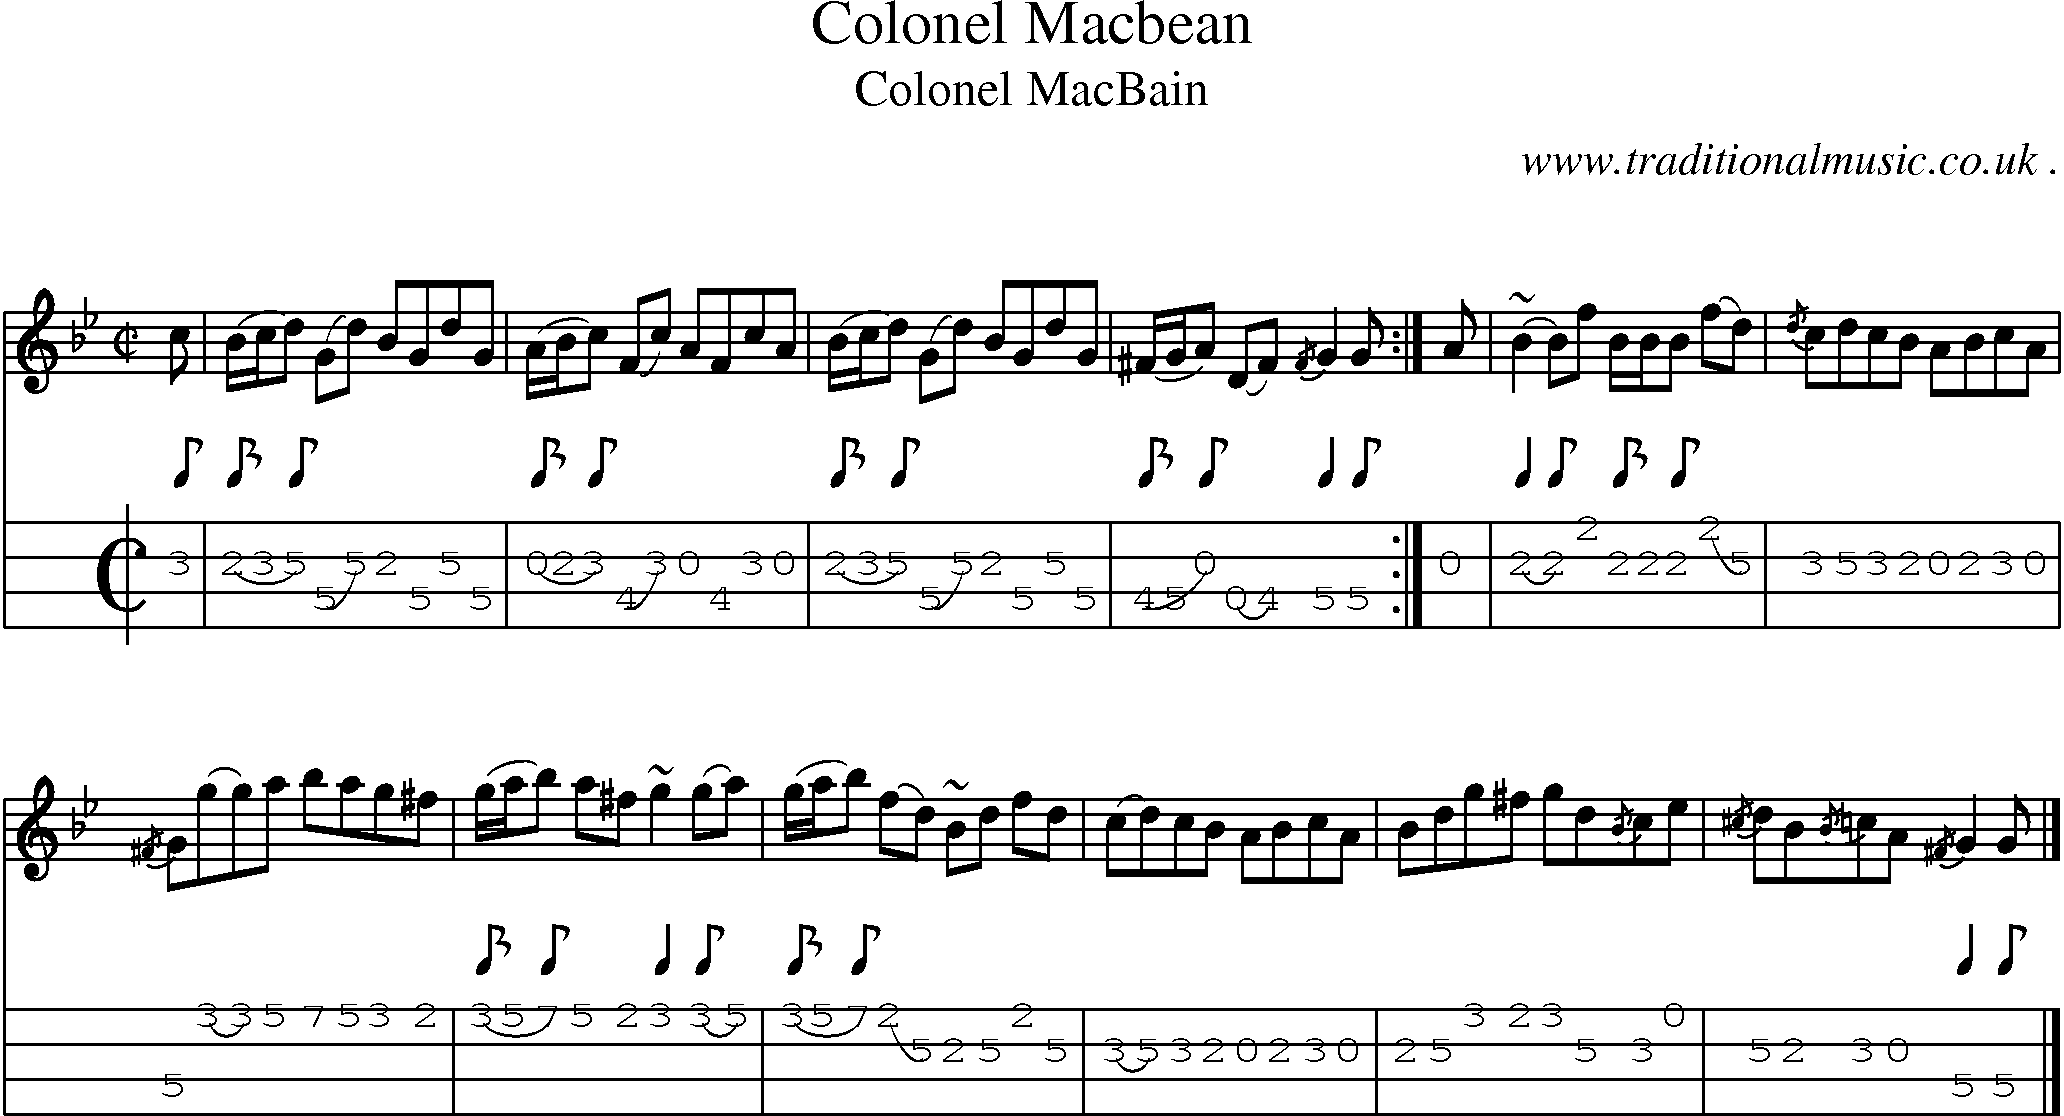 Sheet-music  score, Chords and Mandolin Tabs for Colonel Macbean